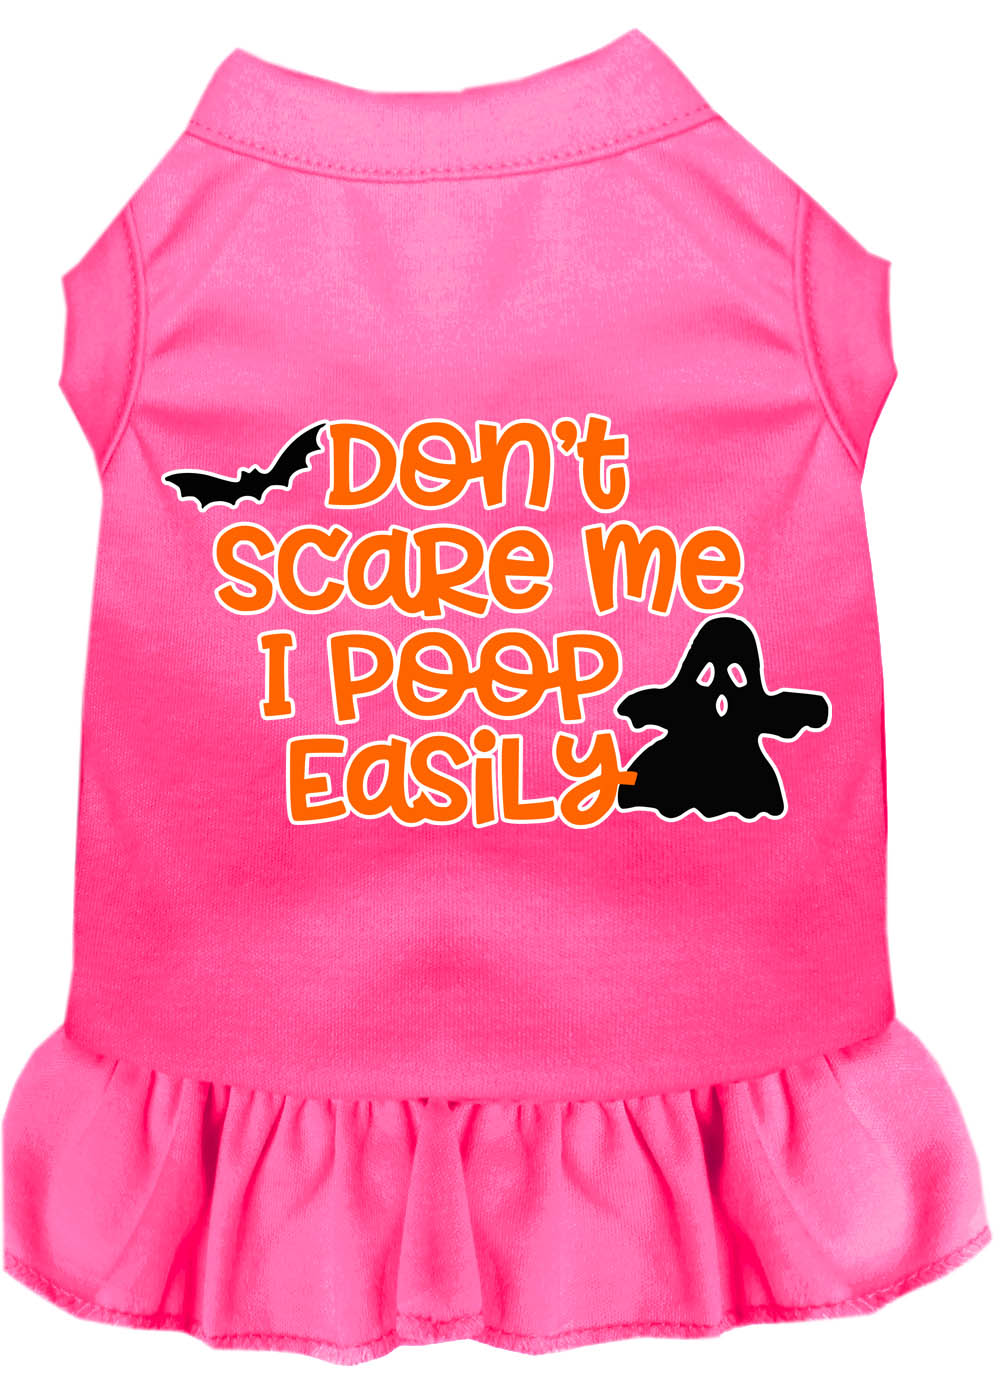 Don't Scare Me, Poops Easily Screen Print Dog Dress Bright Pink Sm